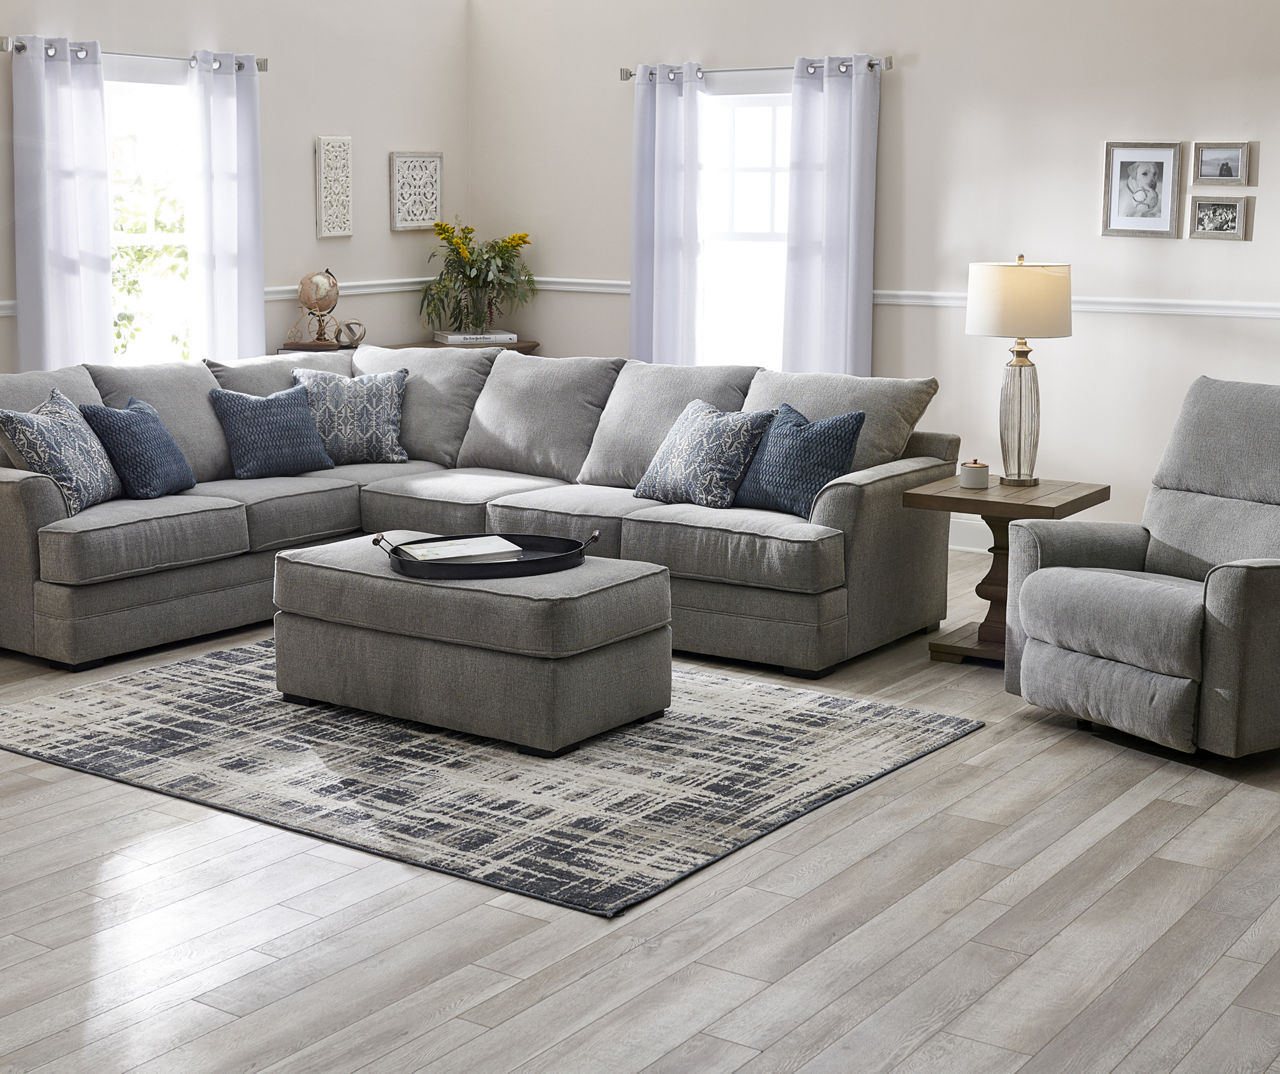 Broyhill Naples Living Room Collection